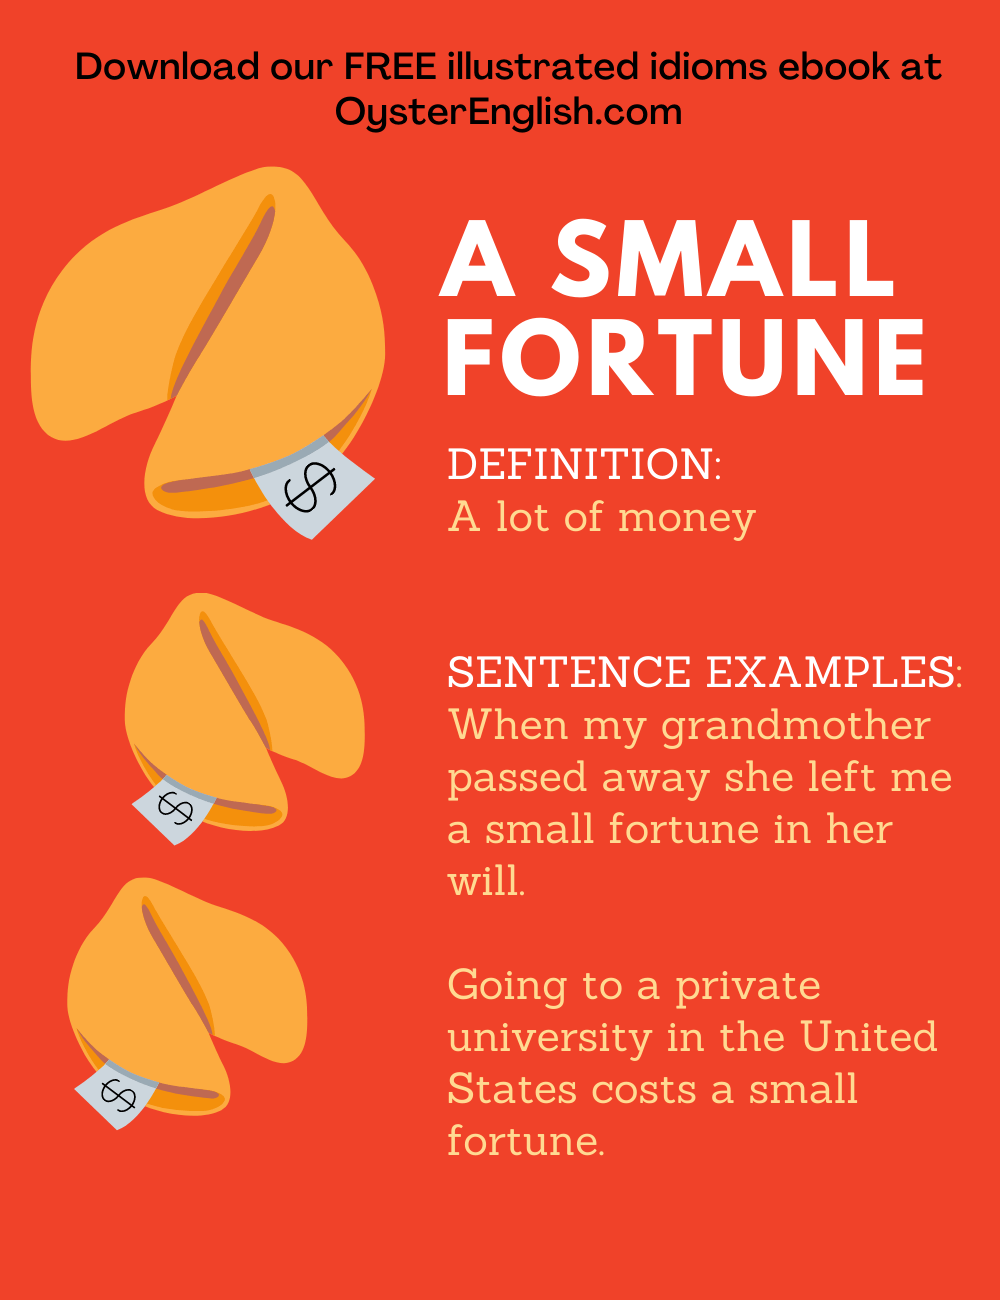 Dollar signs printed on the paperslips sticking out of fortune cookies to depict the idiom "a small fortune" (a lot of money). 2 Sentence examples from the list on the page included.